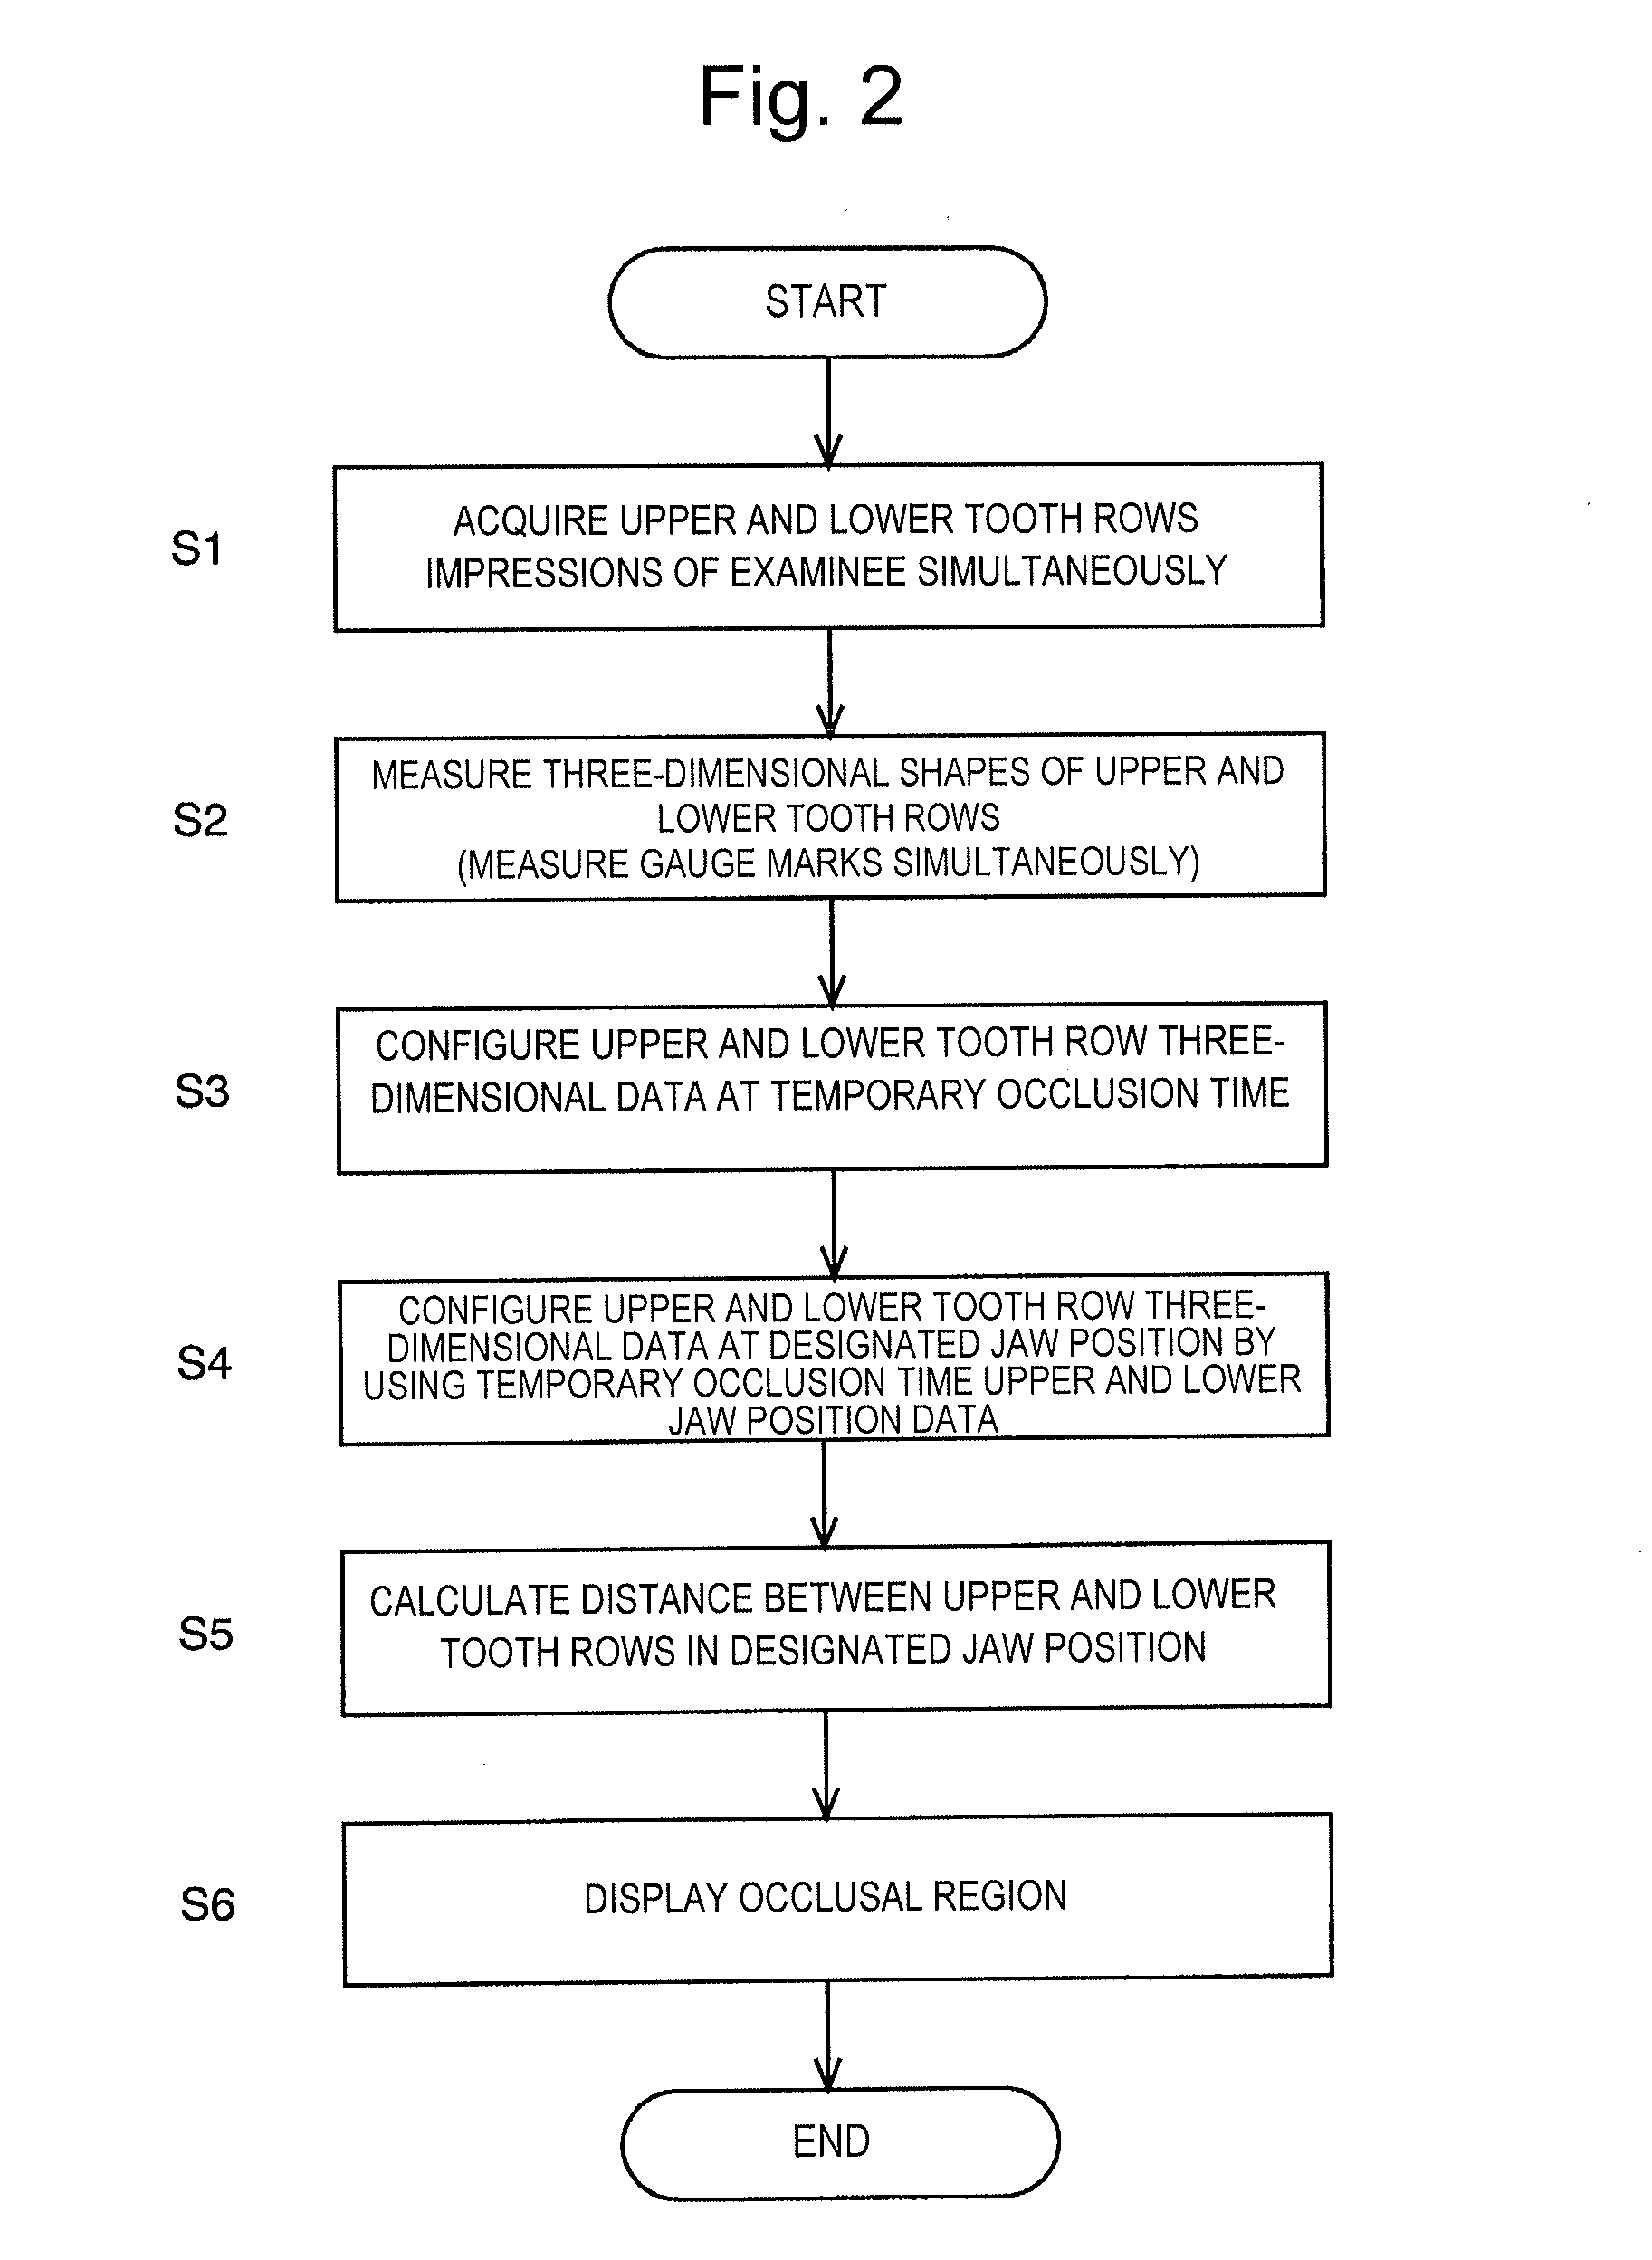 Method and apparatus for upper and lower tooth row three-dimensional simulation display